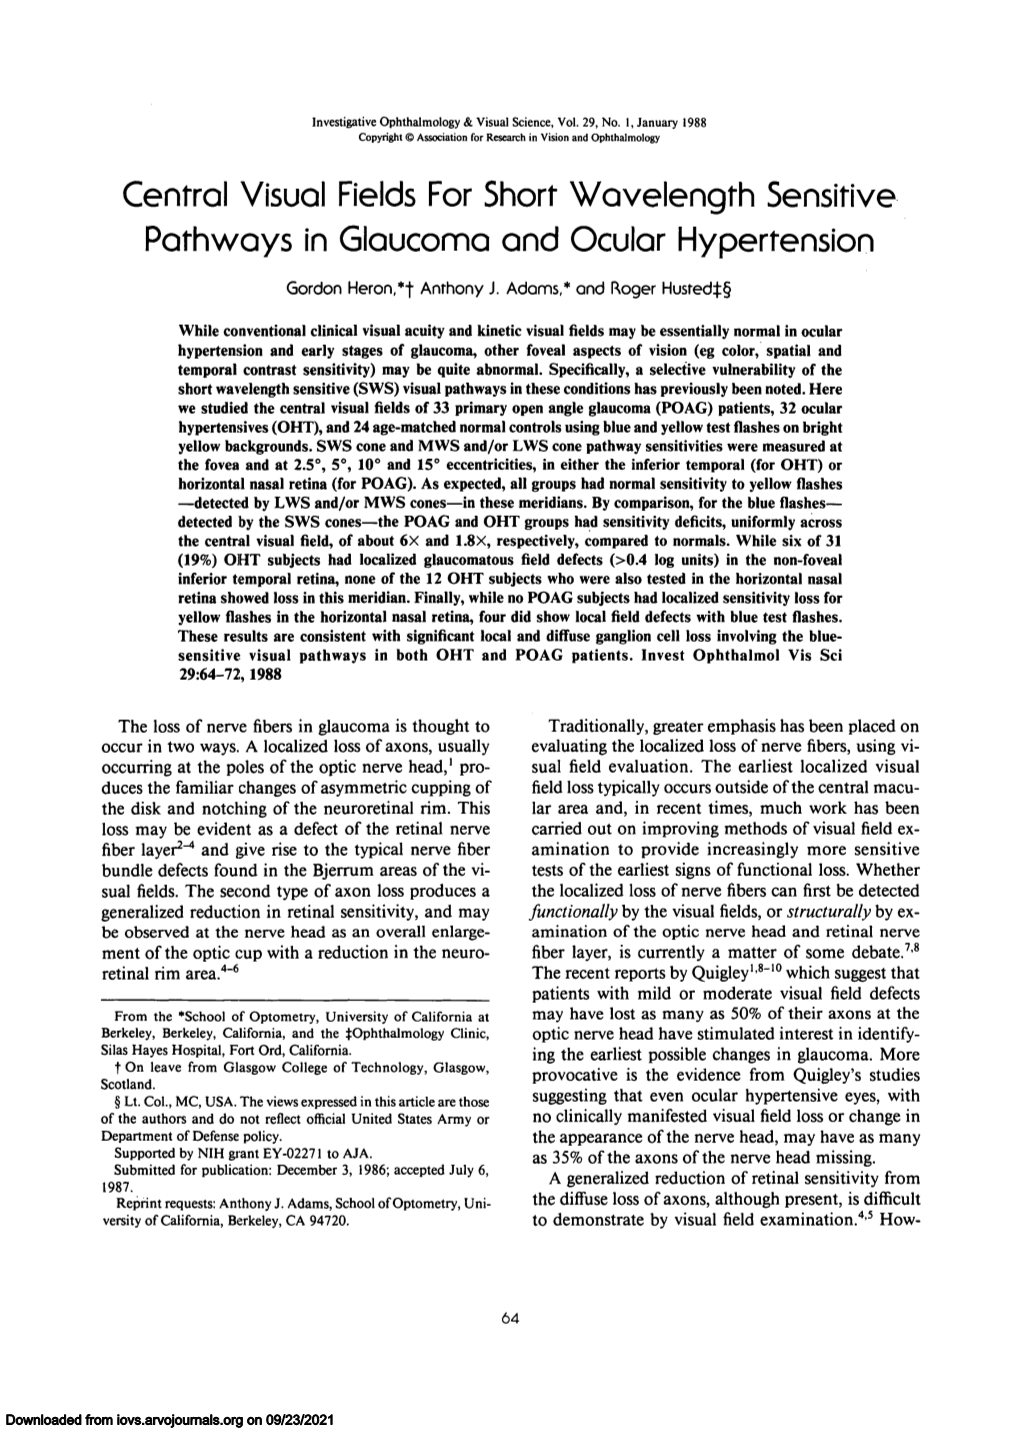 Central Visual Fields for Short Wavelength Sensitive Pathways in Glaucoma and Ocular Hypertension